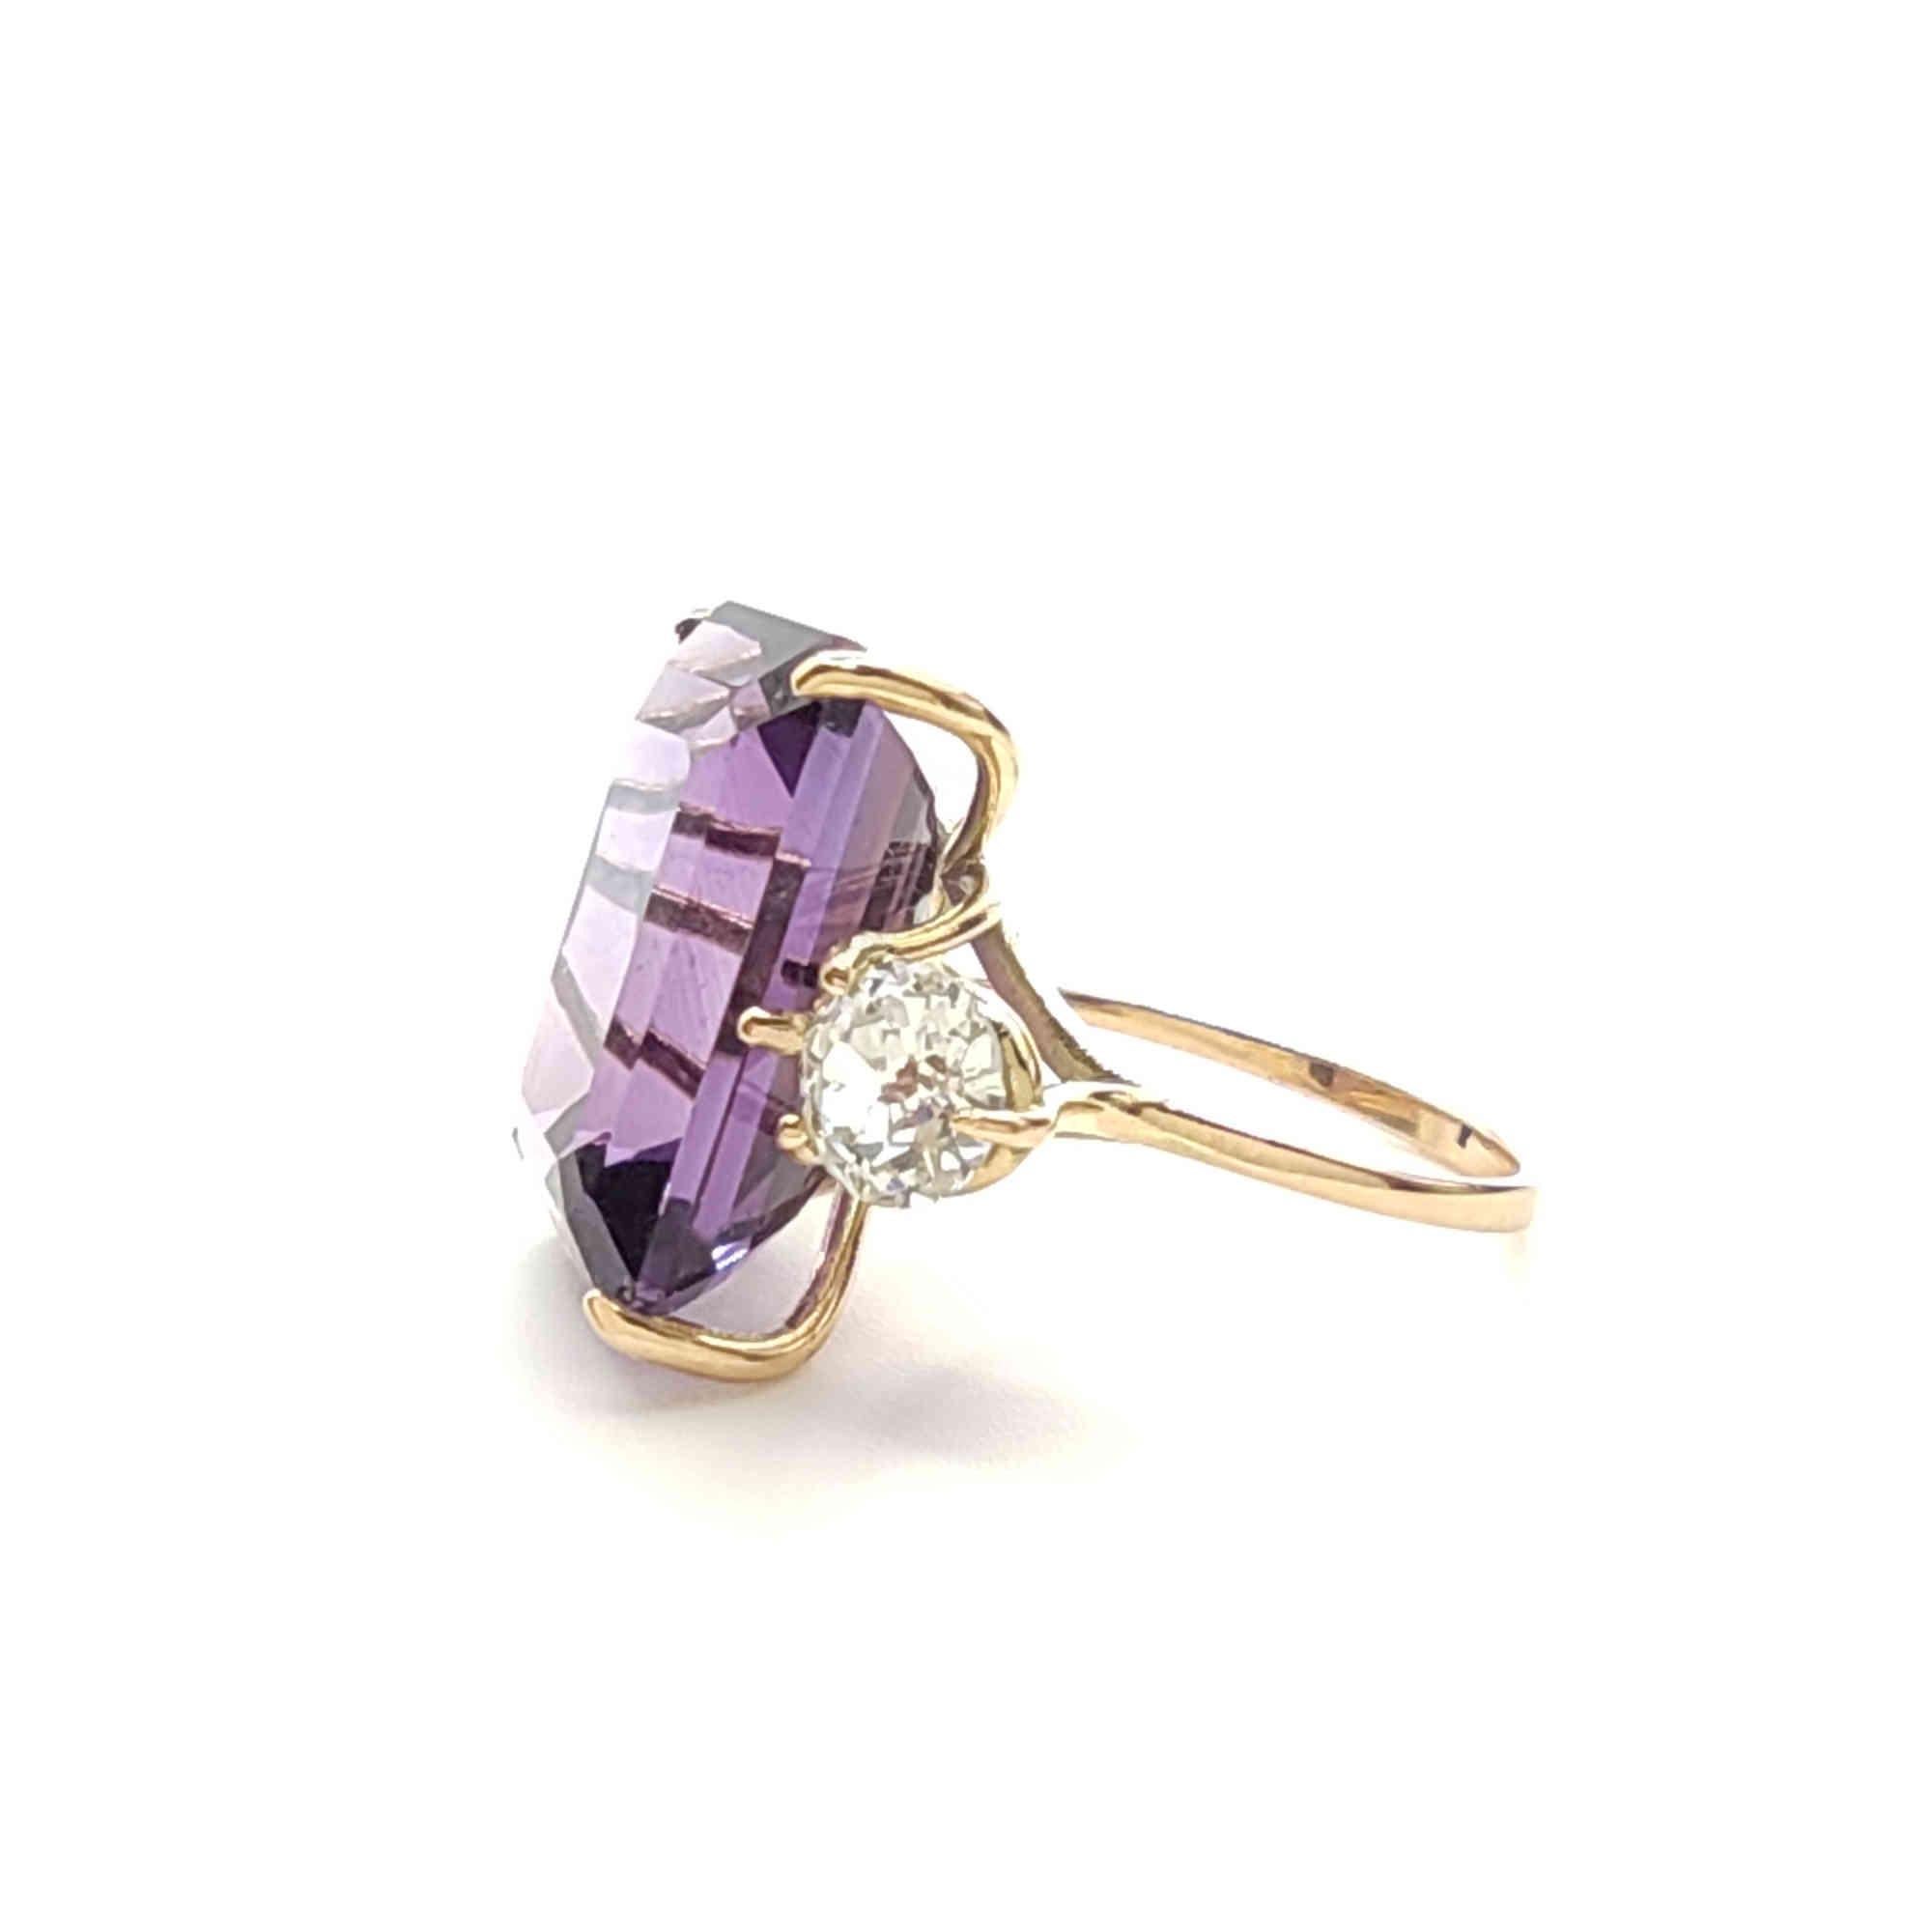 IGE Certified 17.28 Carat Amethyst Diamond Cocktail Ring For Sale 1